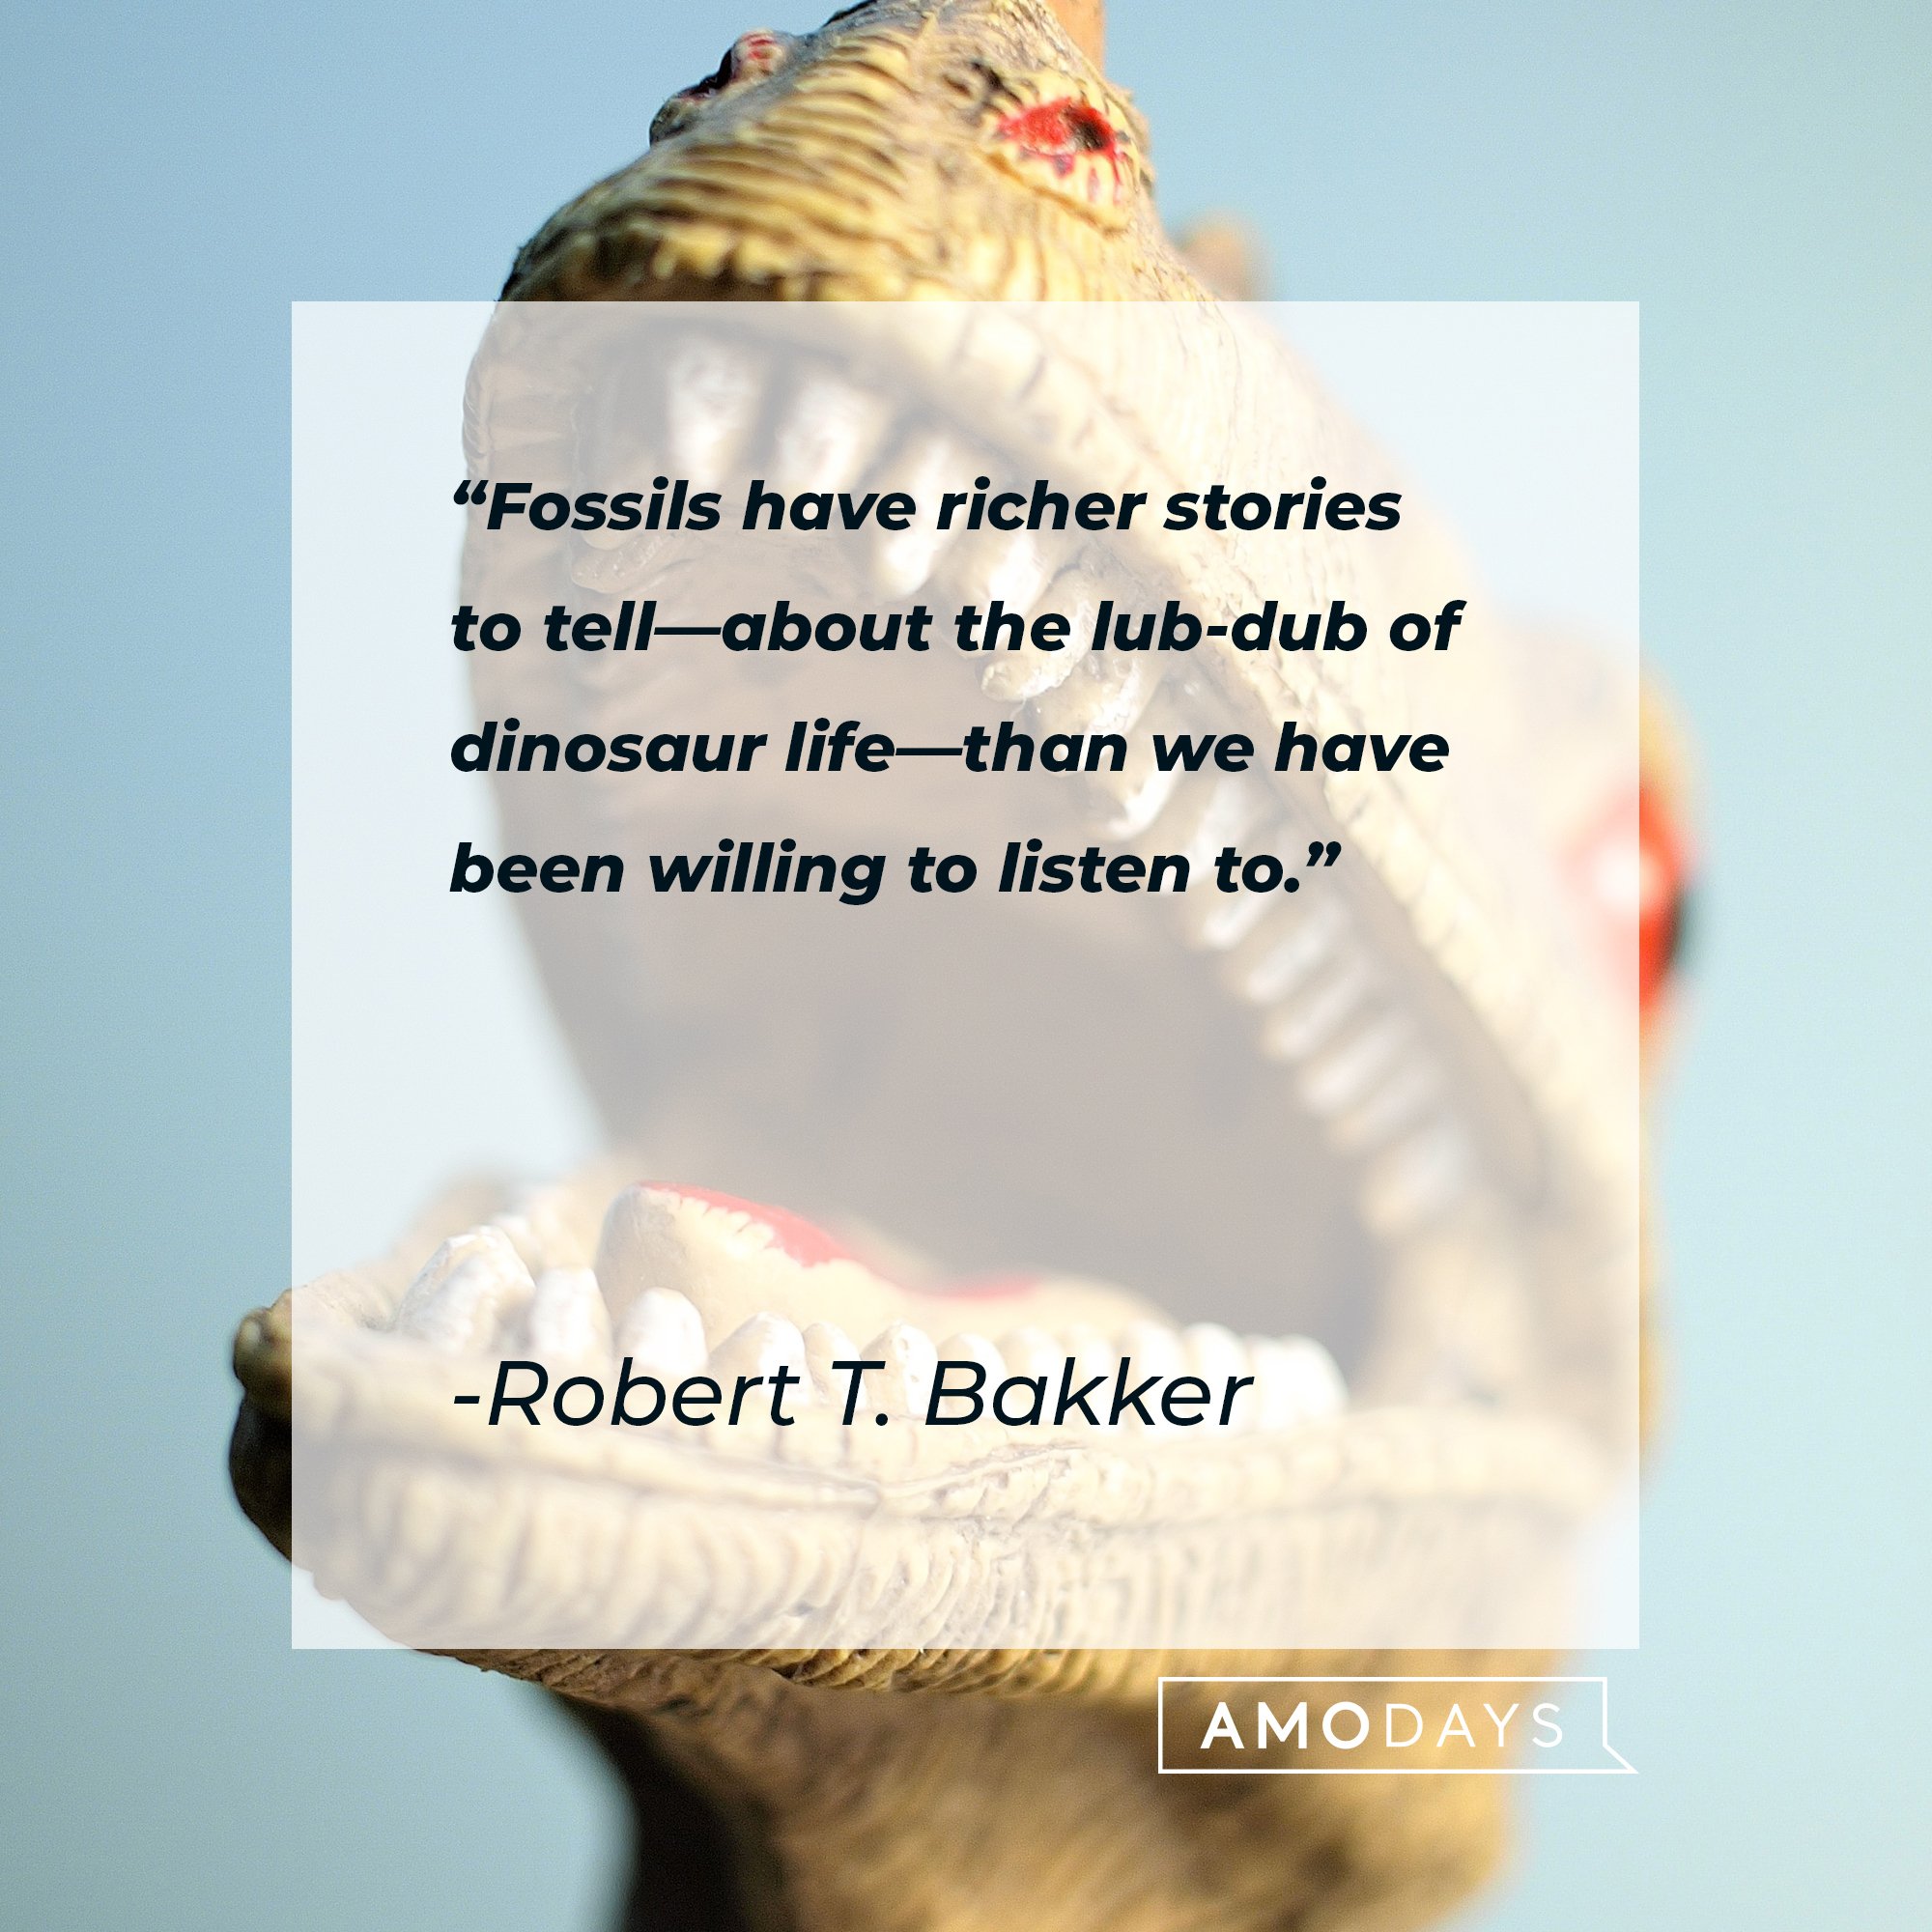 Robert T. Bakker's quote: "Fossils have richer stories to tell—about the lub-dub of dinosaur life—than we have been willing to listen to." | Image: AmoDays